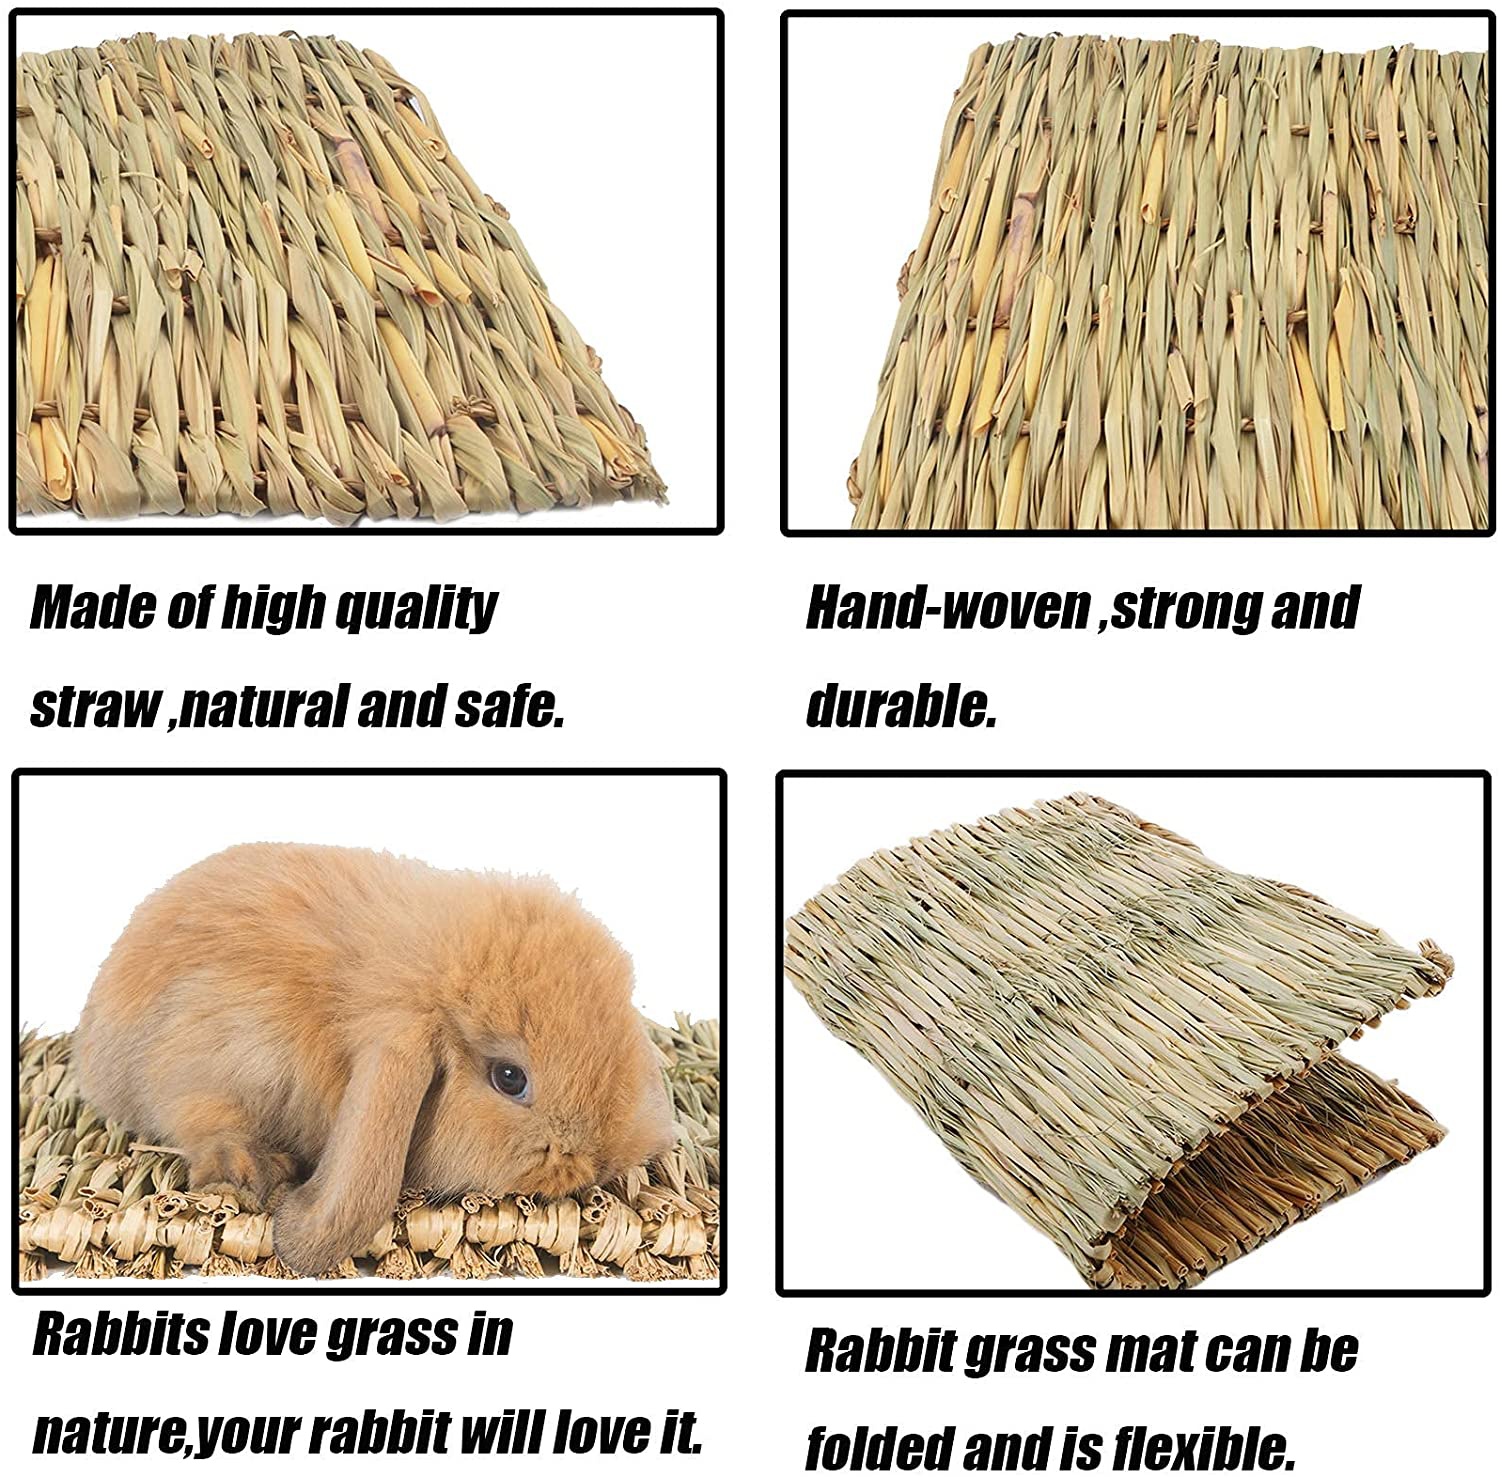 Tfwadmx Rabbit Grass Mat,16.5''X11'' Large Small Animal Natural Woven Straw Bed Hay Sleeping Nest Cage Chew Play Toy for Chinchilla Guinea Pig Ferret Bunny Hamster Rat-